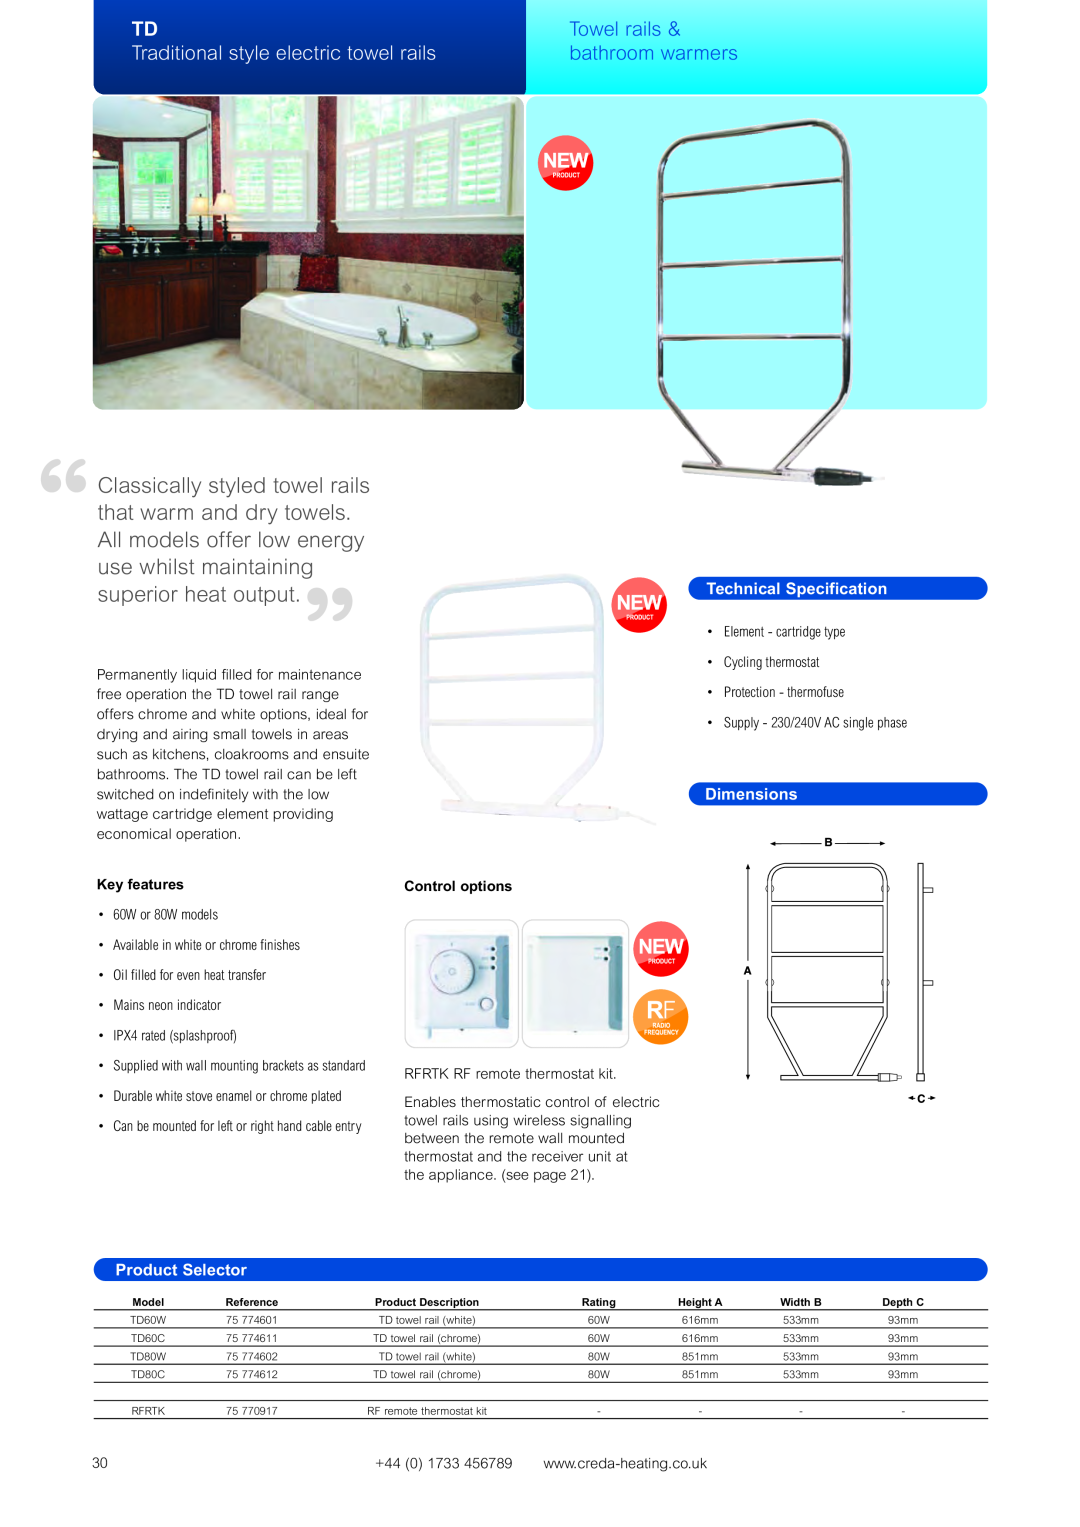 Creda Heating Solution Towel rails, Traditional style electric towel rails, bathroom warmers, Technical Specification 